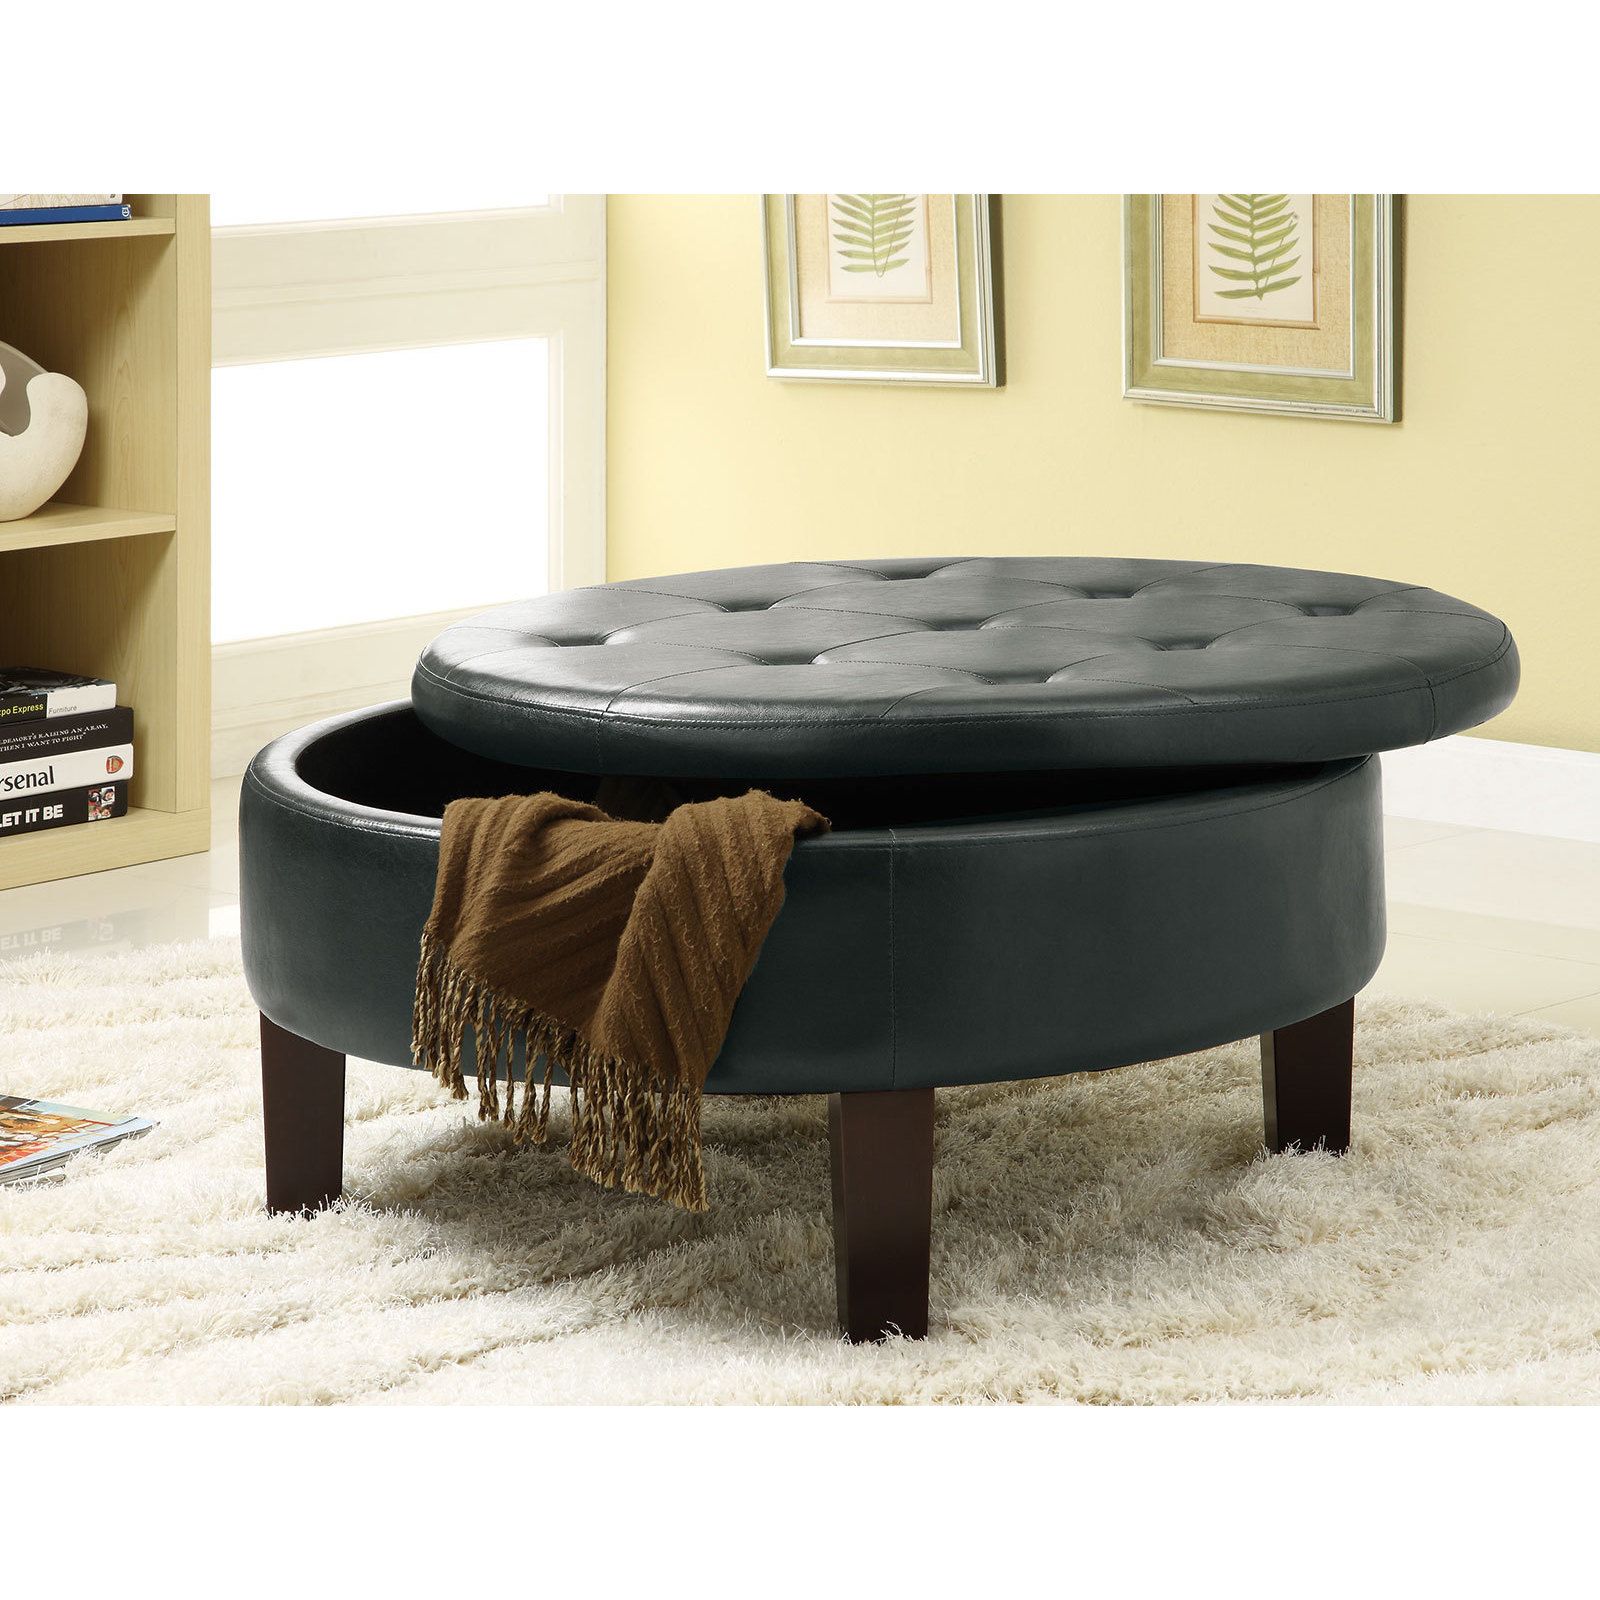 Shop Coaster Company Tufted Brown Faux Leather Round Storage Ottoman For Brown Leather Round Pouf Ottomans (View 12 of 20)